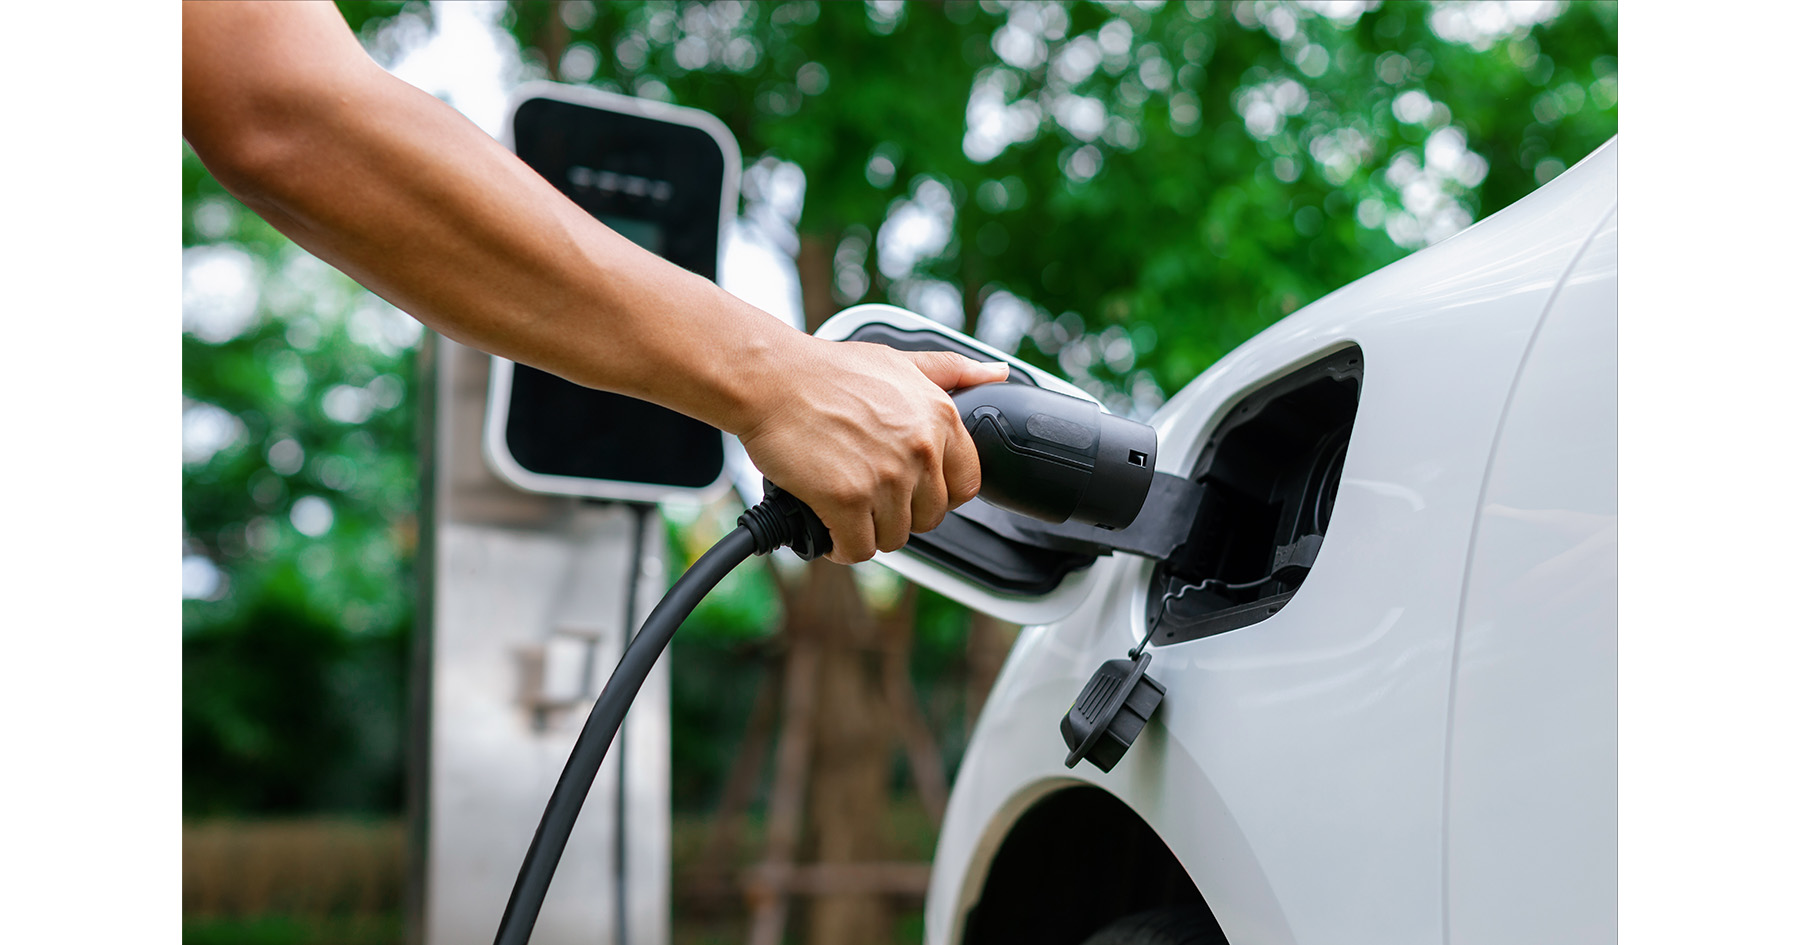  C-Store Demand for EV Infrastructure Is Growing, Says Owl Services 